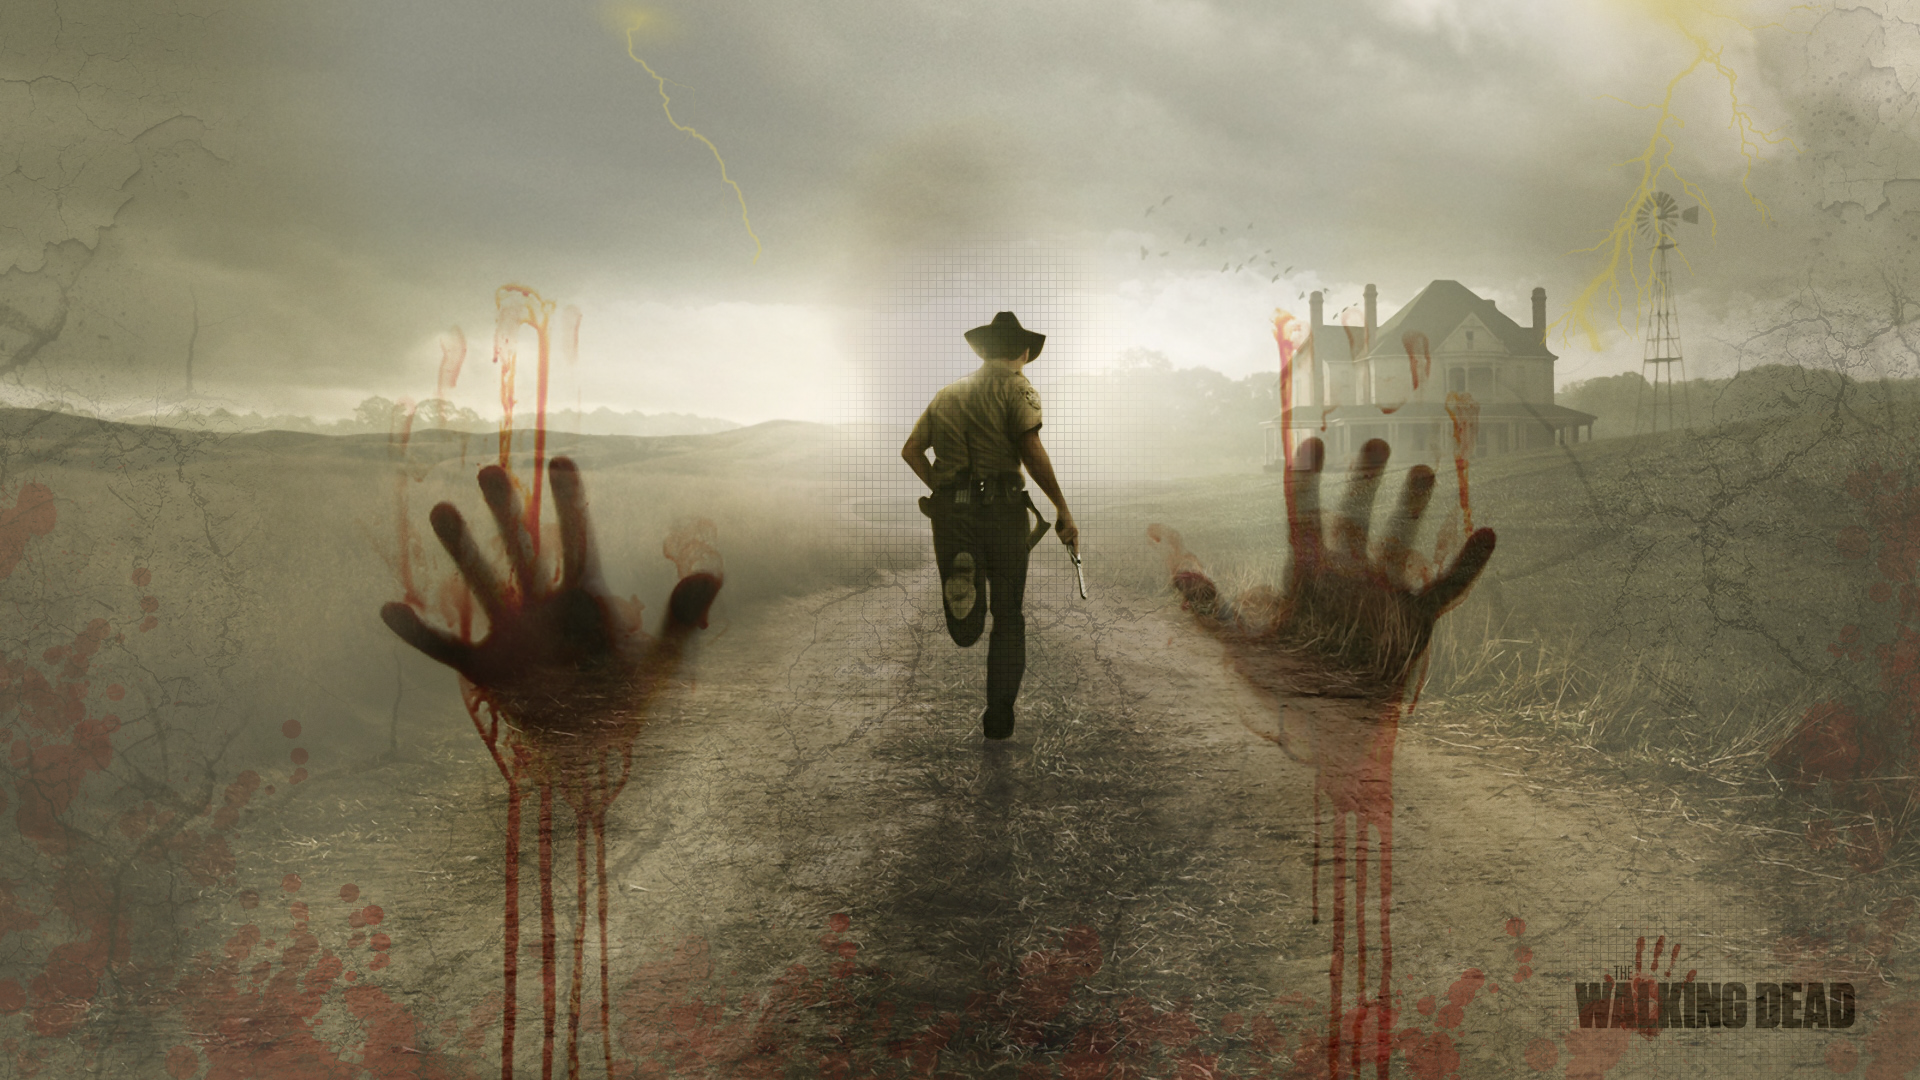 The Walking Dead Wallpaper Collection (40+)